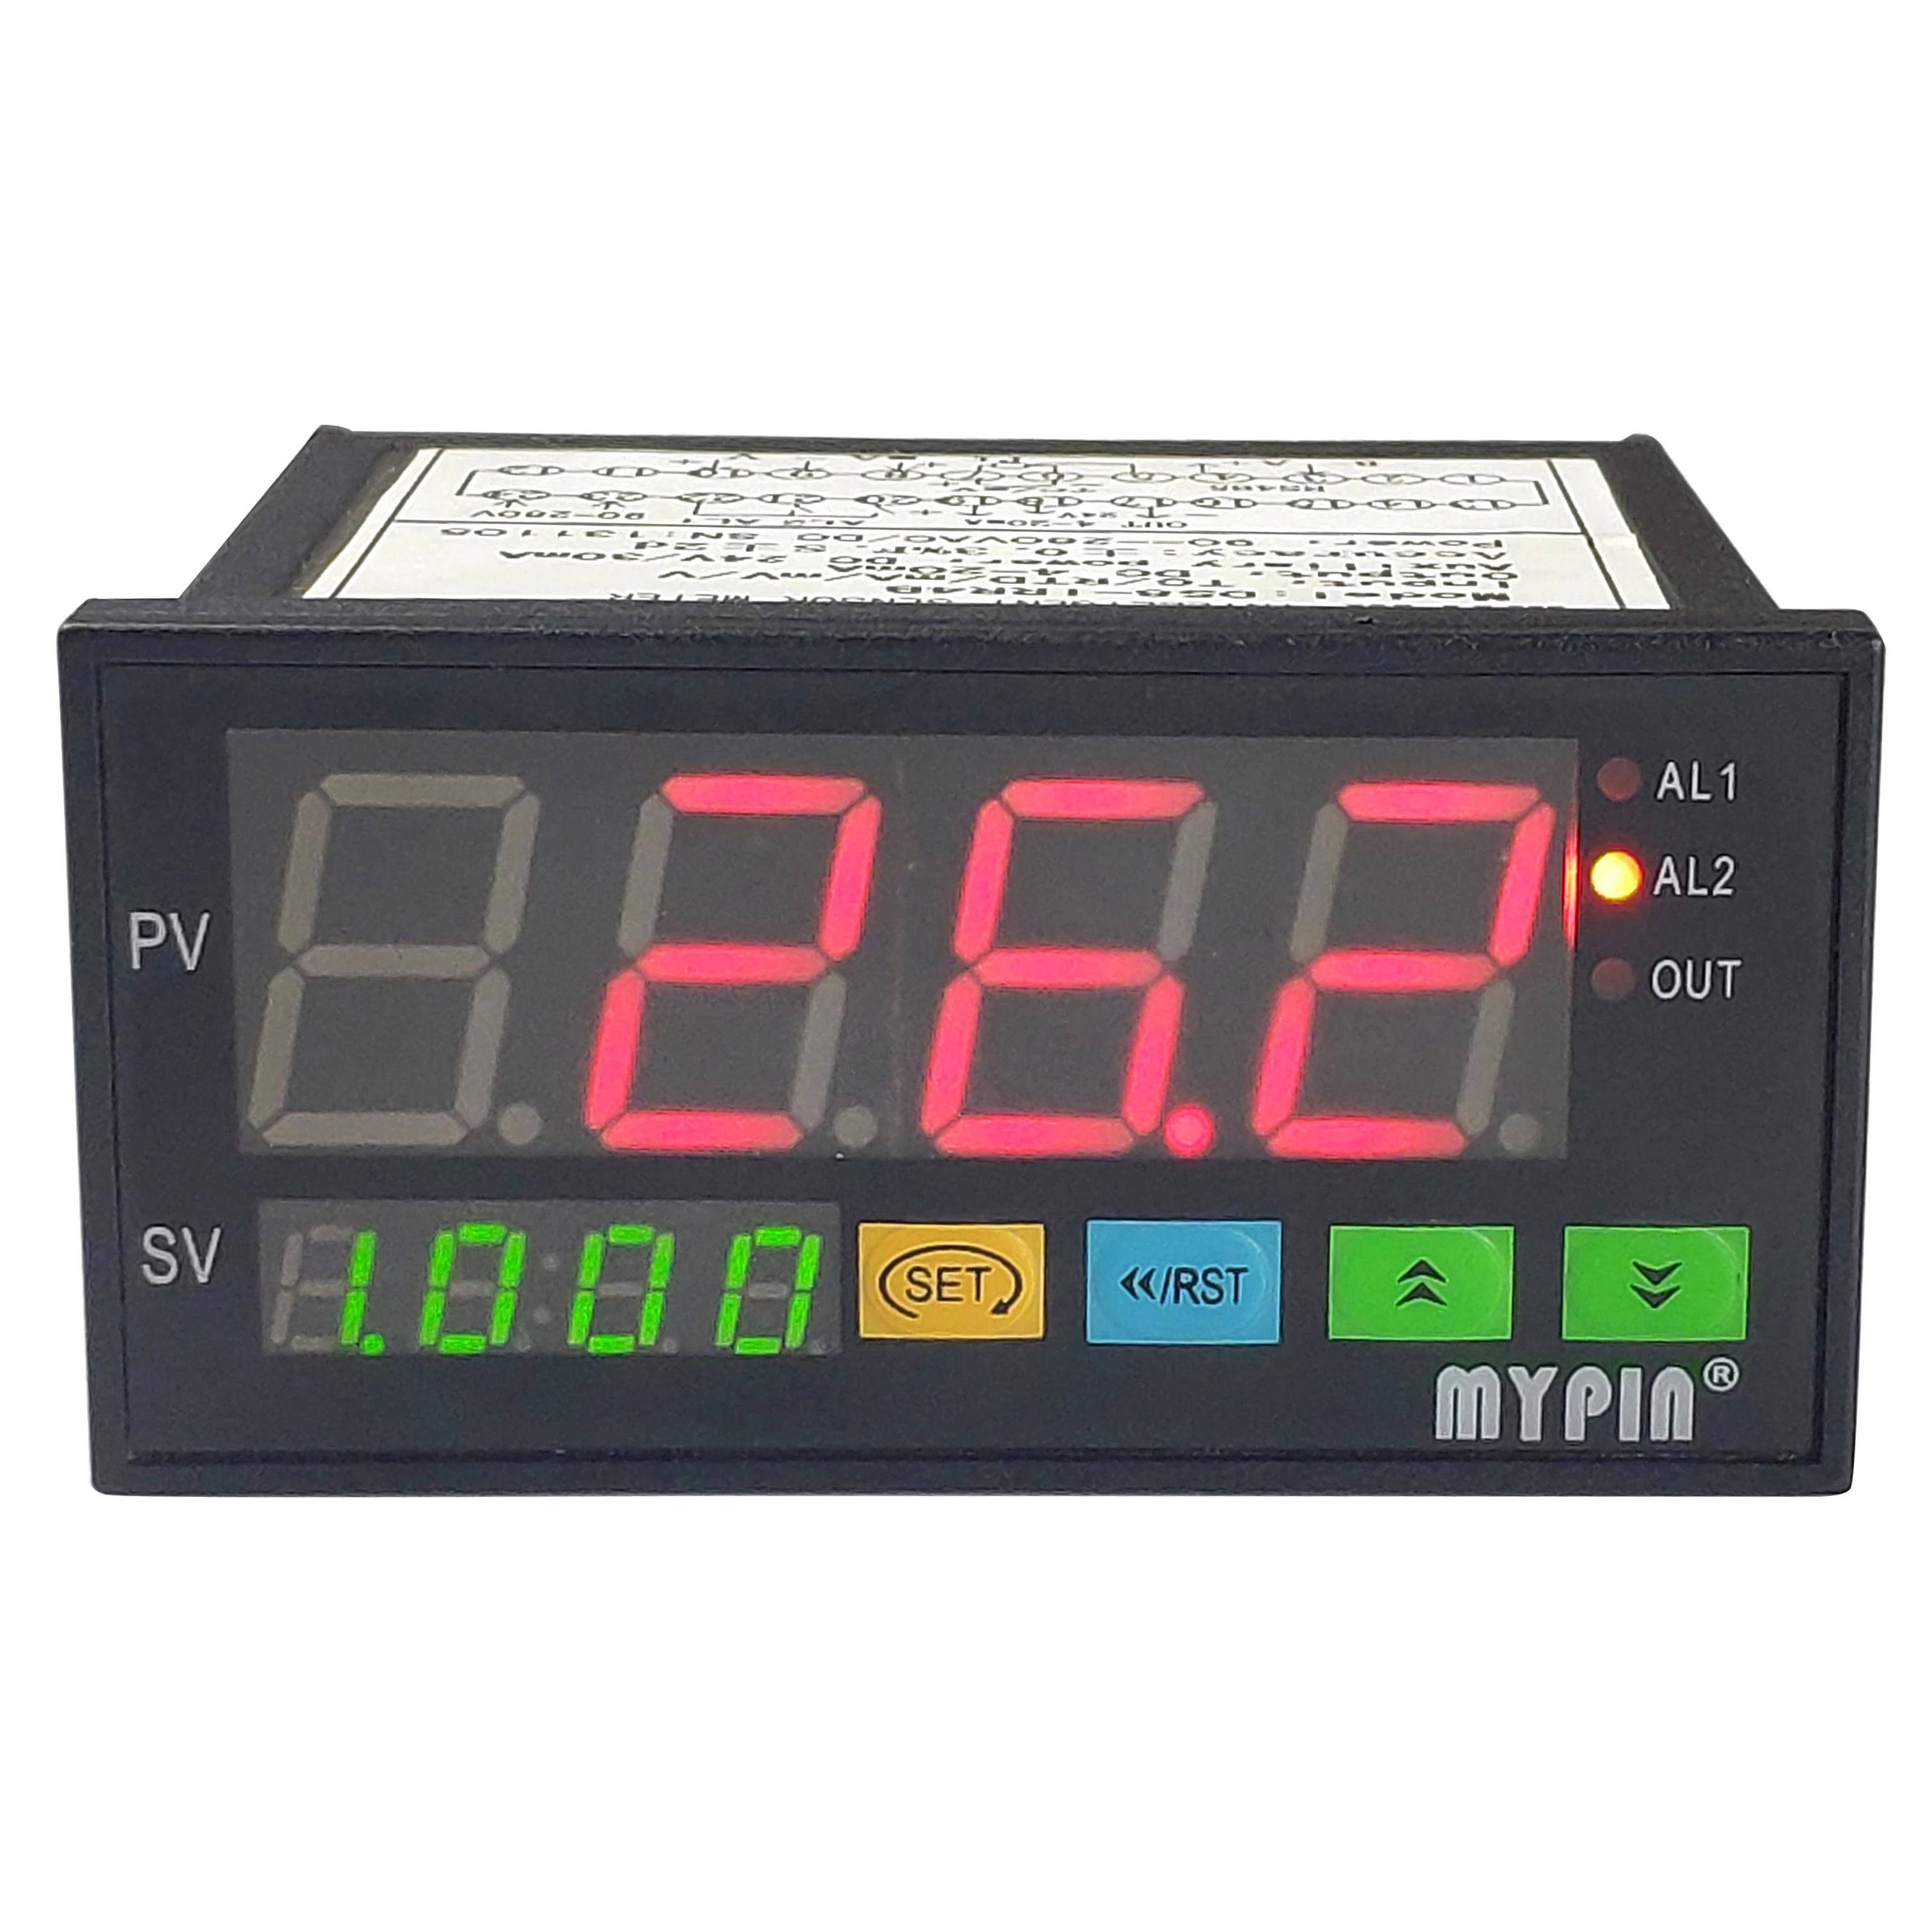 Multi-function Universal Meter For Weigh/Temperature/Pressure/Humidity DS8-IRRRB 